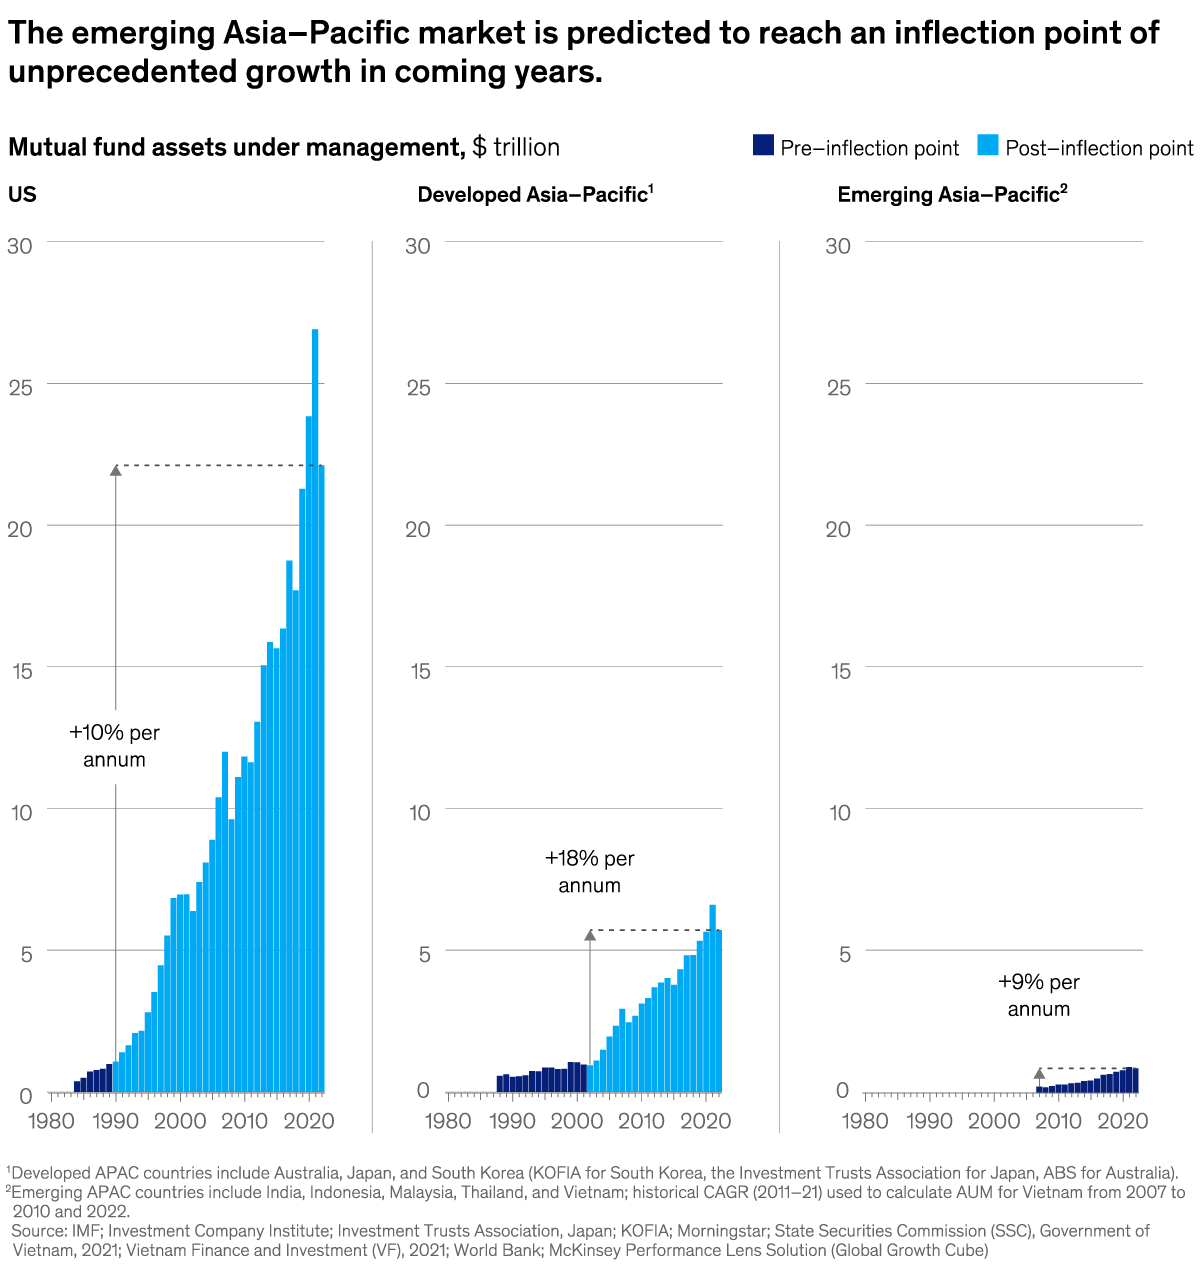 A chart titled “The emerging Asia-Pacific market is predicted to reach an inflection point of unprecedented growth in coming years.” Click to open the full article on McKinsey.com.